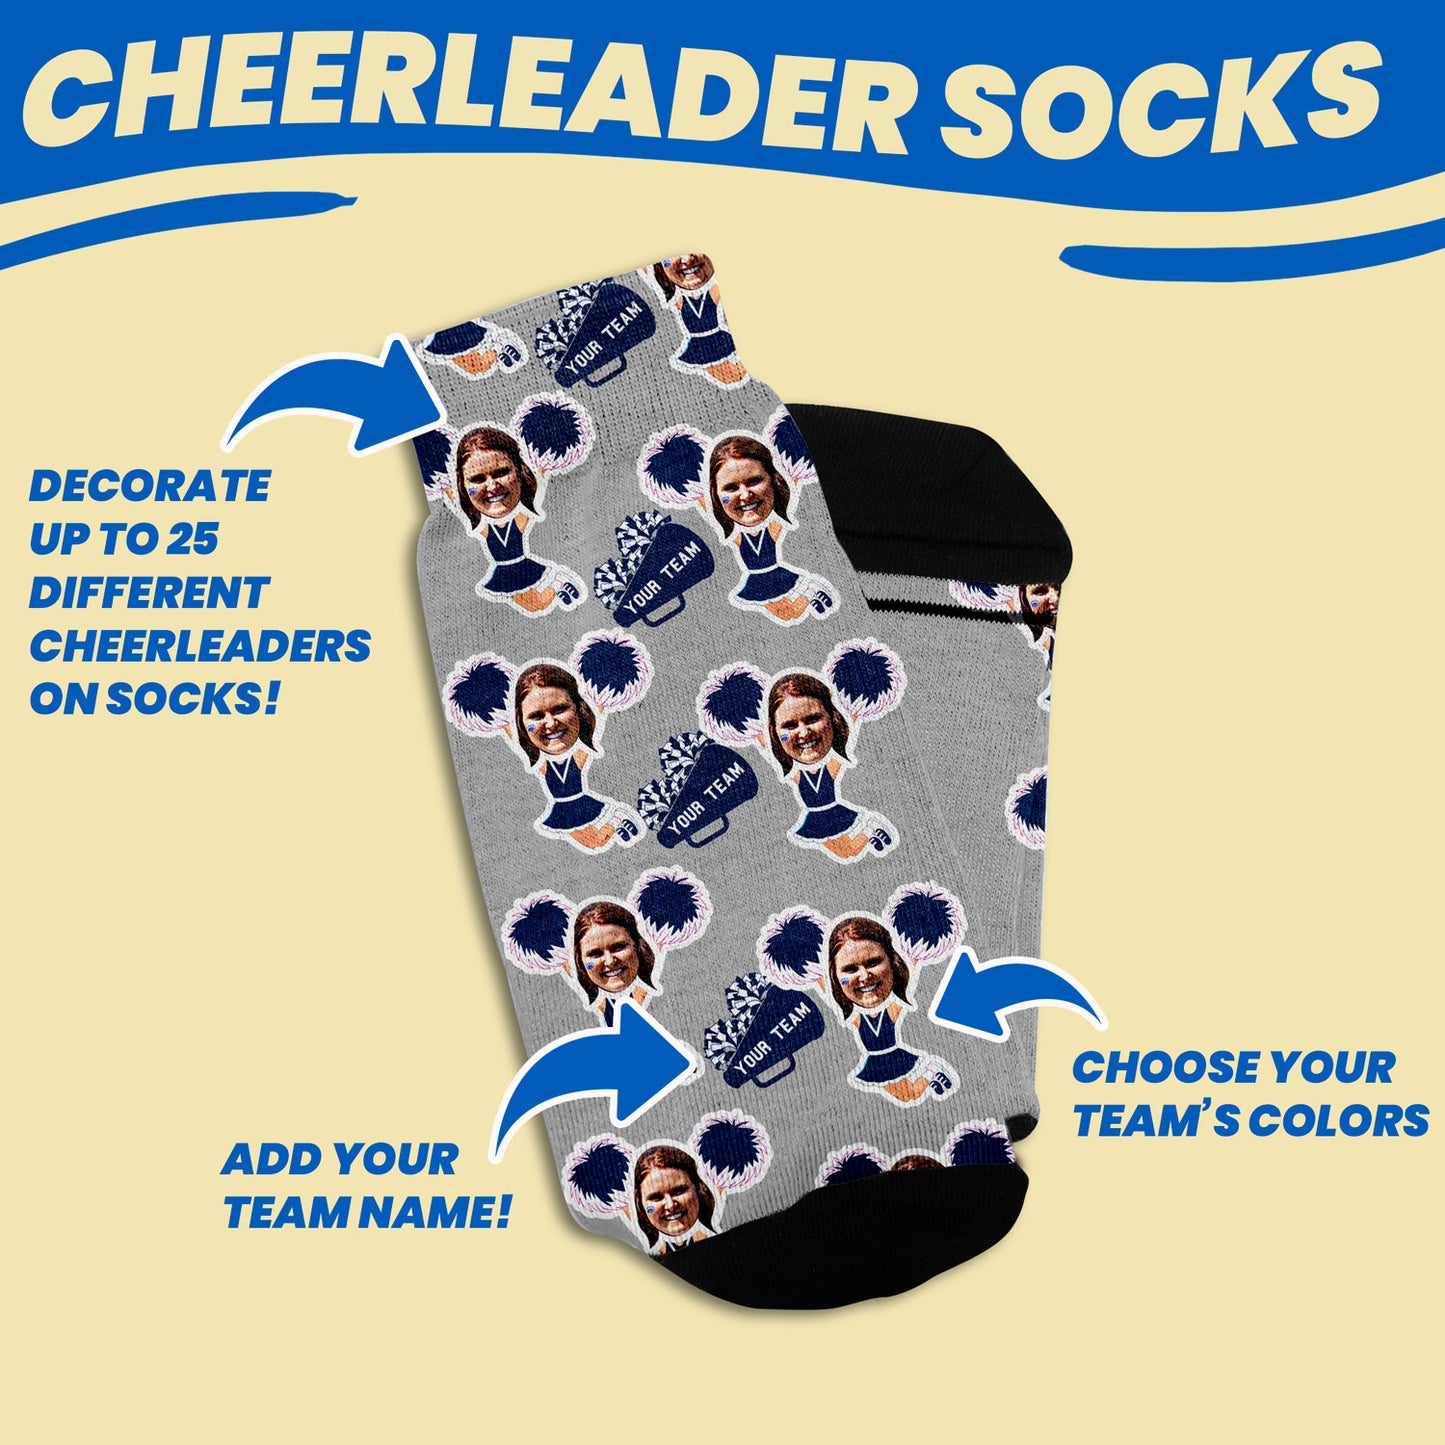 Personalized cheerleader gift socks with faces customization features